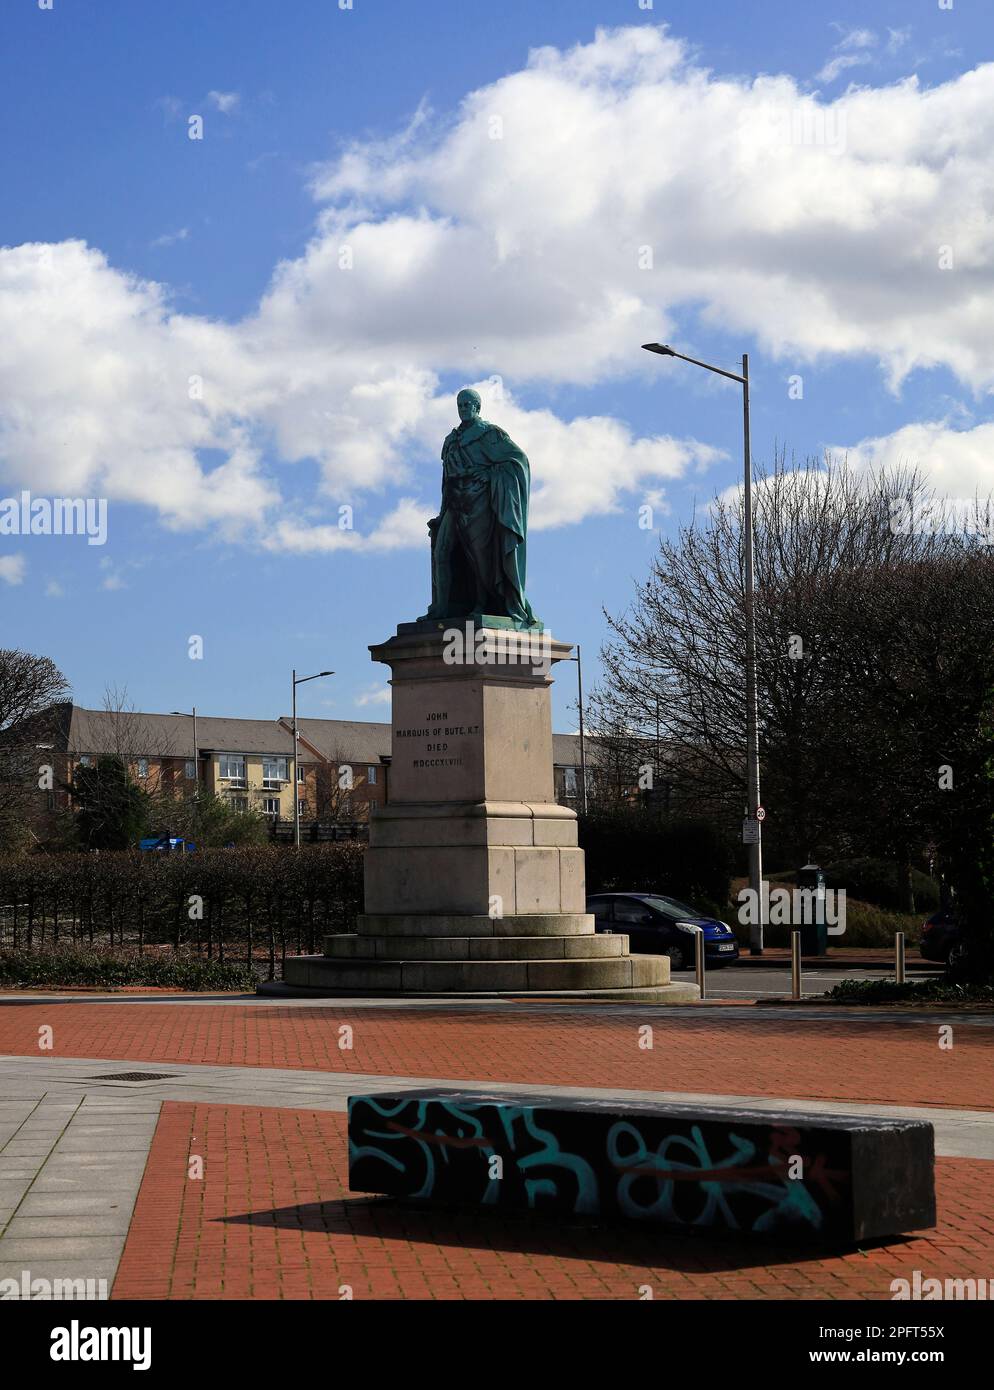 Statue of 2nd Marquis (marquess) of Bute, John Crichton Stuart, K.T. Died 1848. 7th Earl of Dumfries. Views of Callaghan Square Cardiff.March 2023 Stock Photo